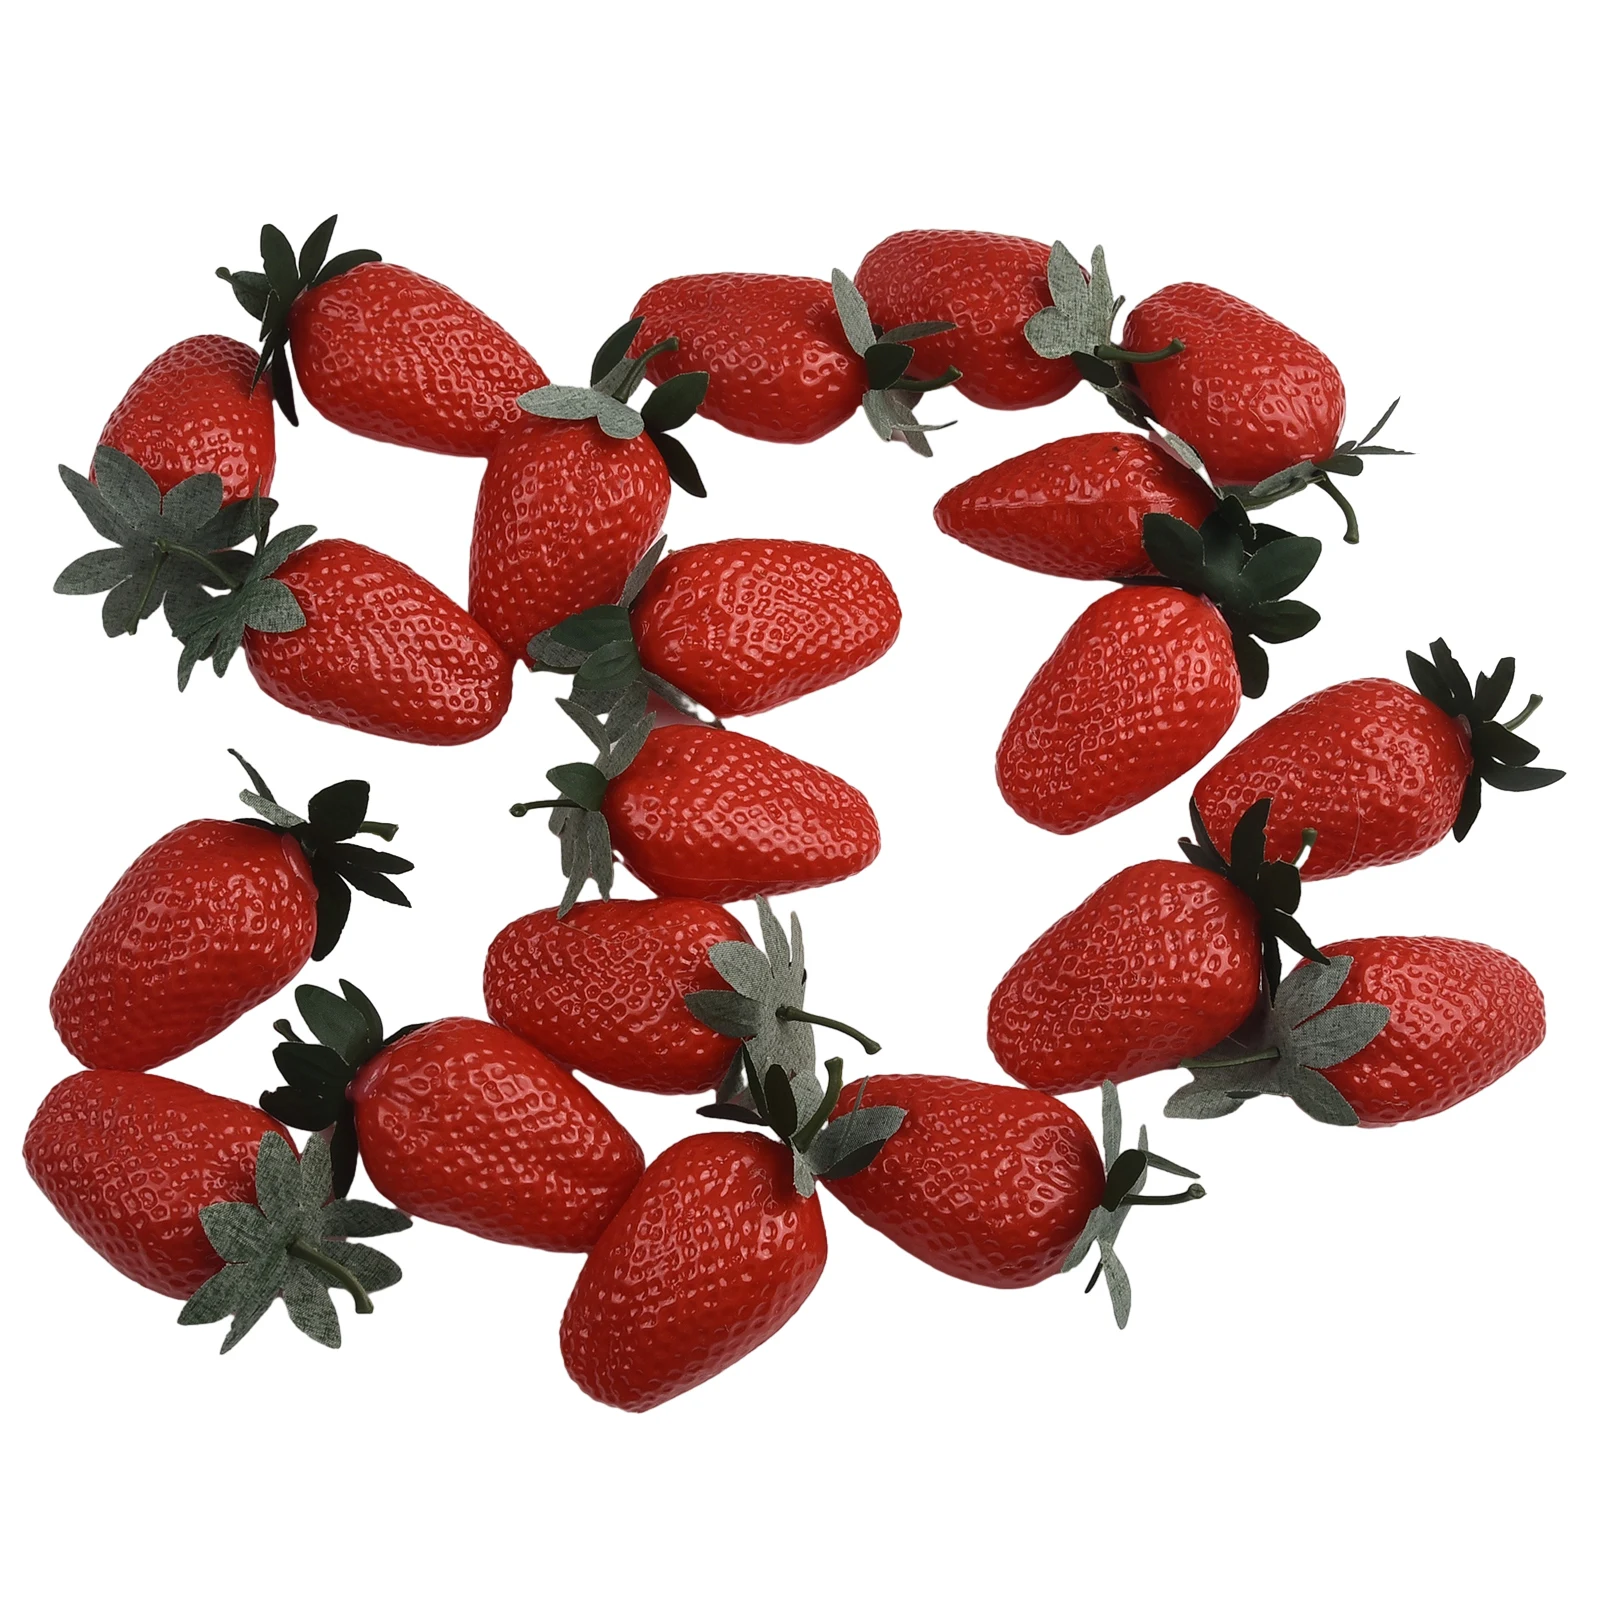 

20Pcs Artificial Strawberry Fake Fruit Display Kitchen Home Food Table Decorations Plastic Christmas Decor 3.2cm 6.5cm